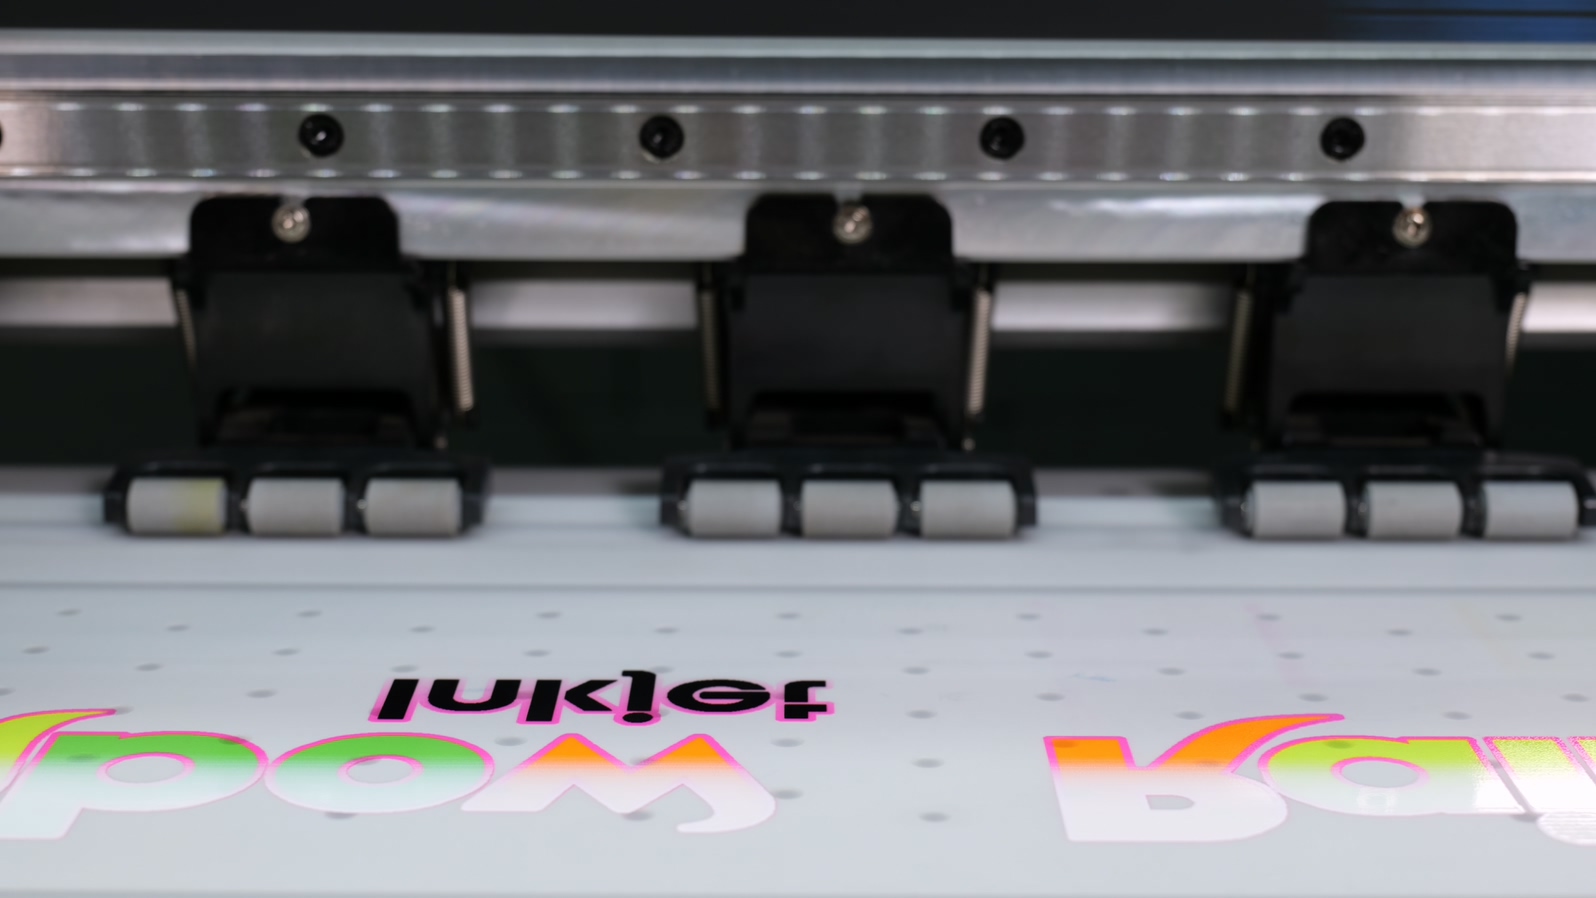 Fluorescent DTF Printing and Printer Setup available.